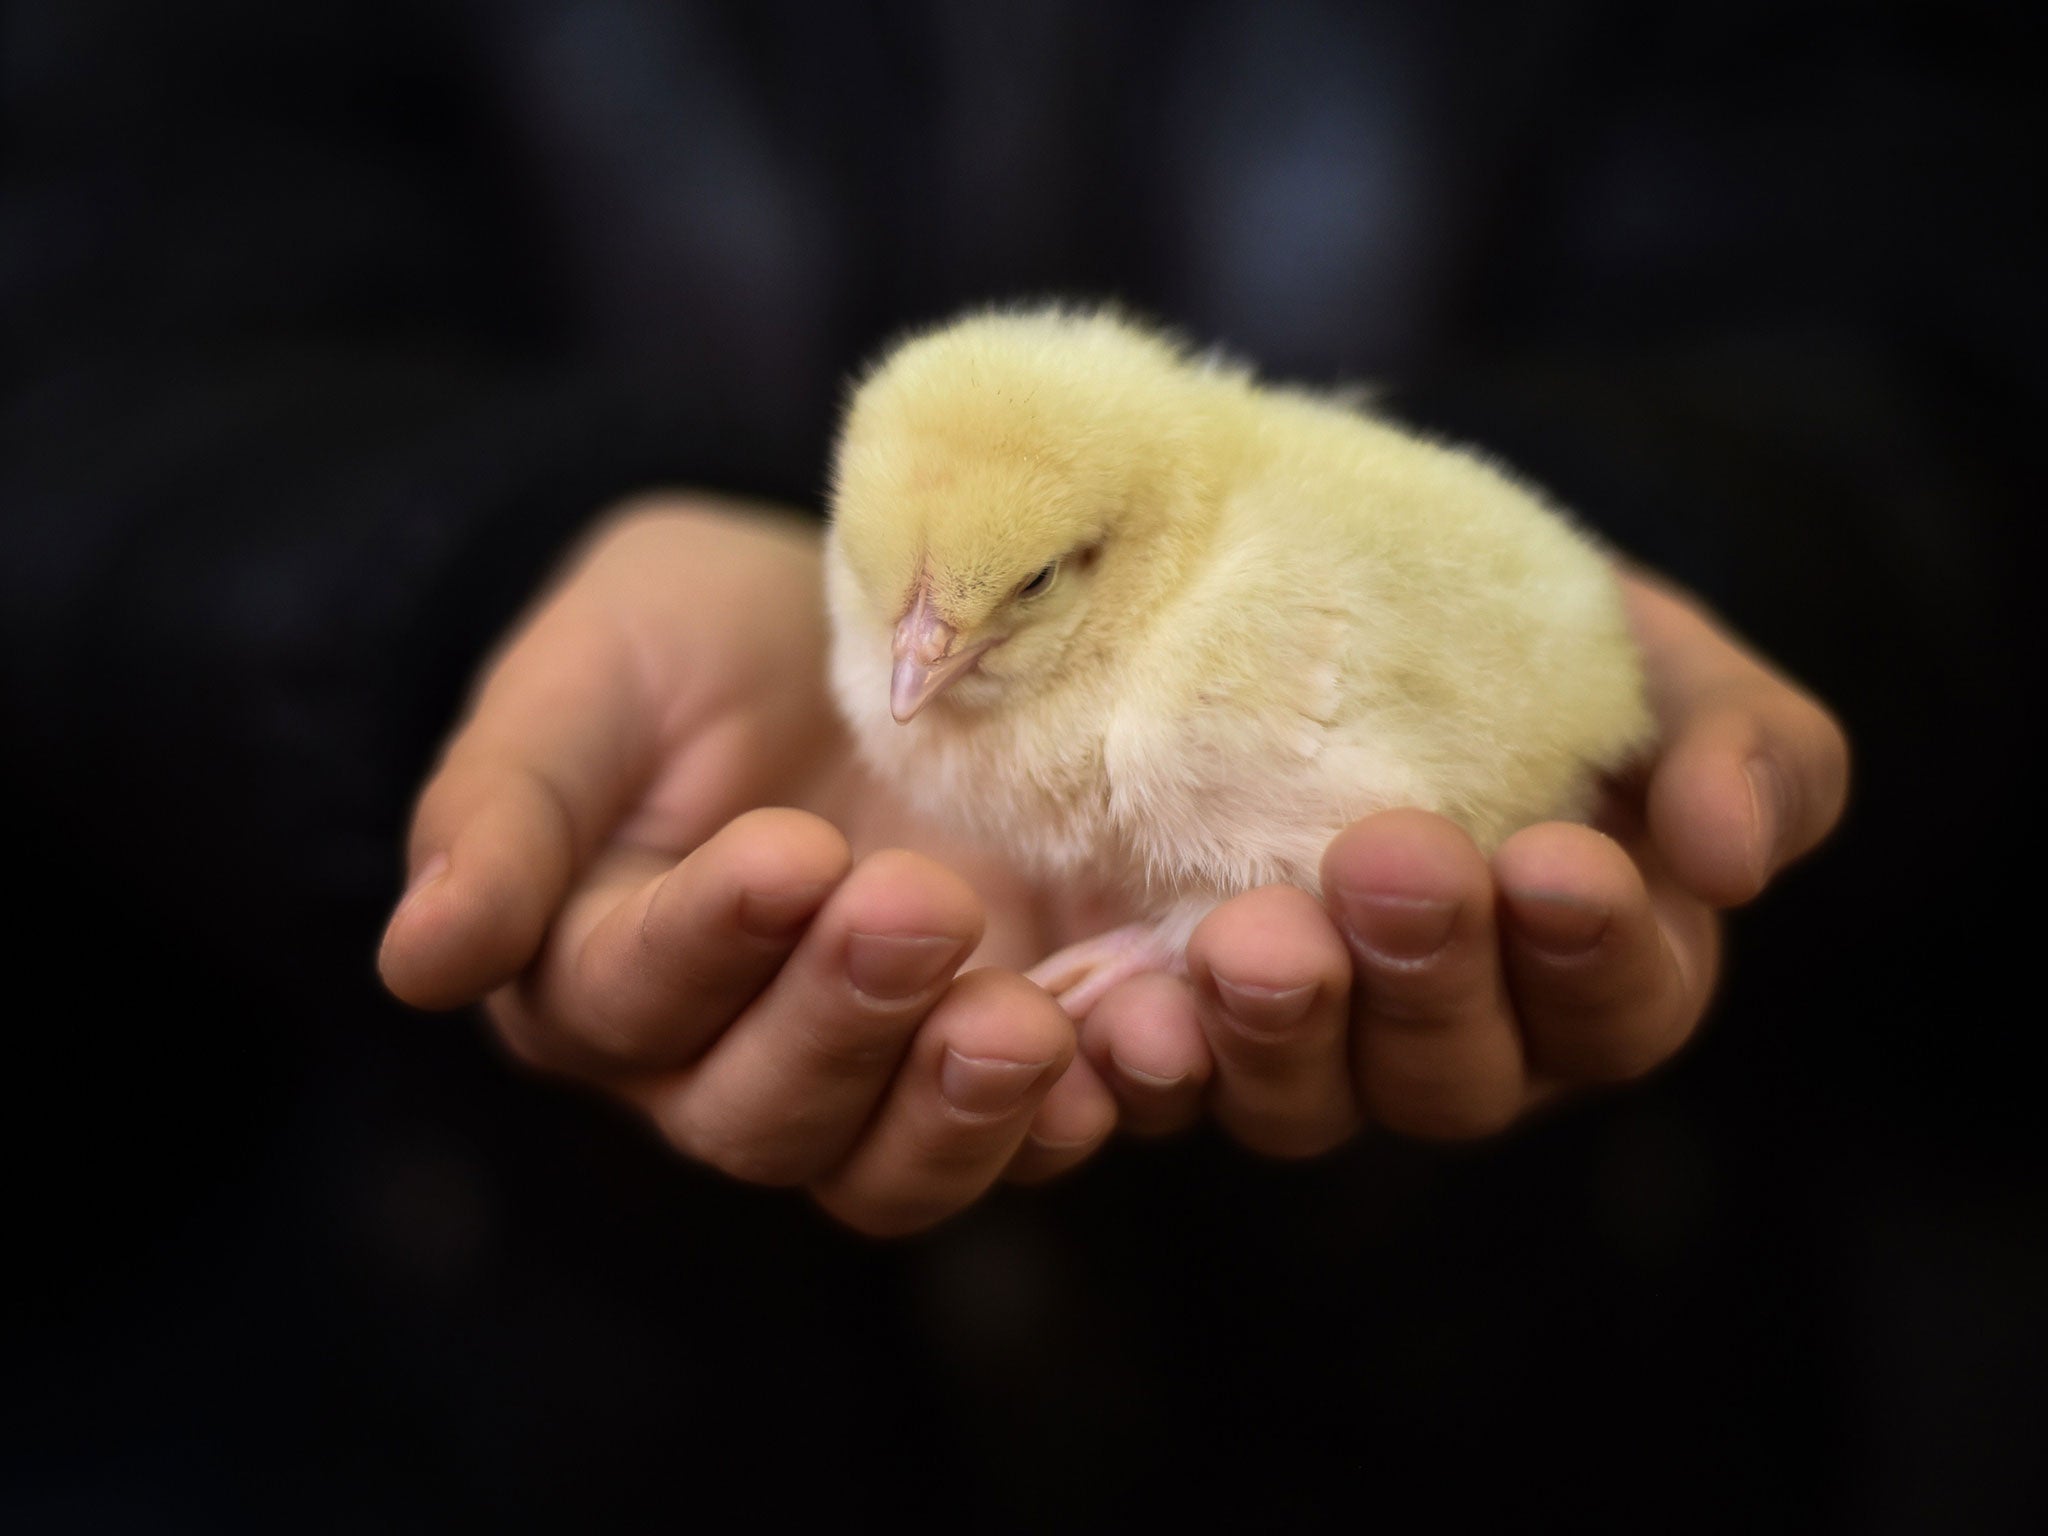 A boy holds a chick during the Russian National Agricultural Exhibition Golden Autumn 2014 in Moscow on October 9, 2014.